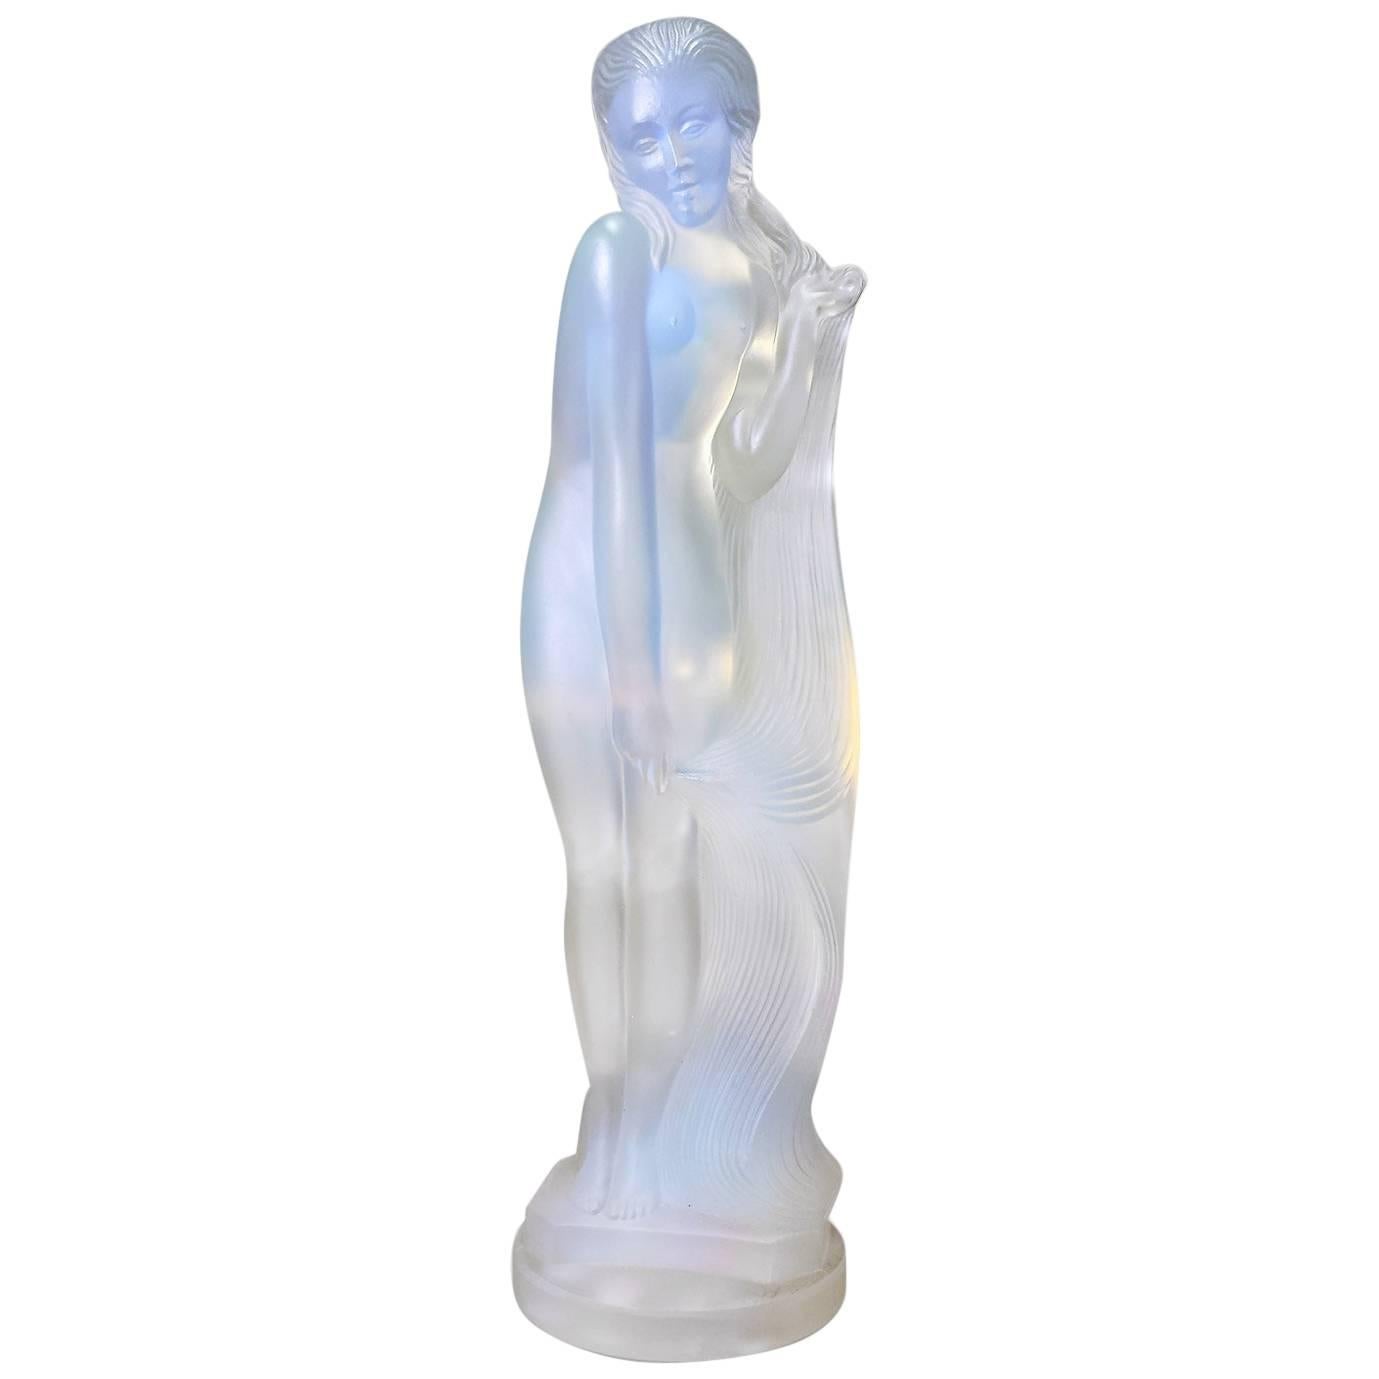 'Nu', an Art Deco Glass Figurine by Lucile Sevin for Etling For Sale